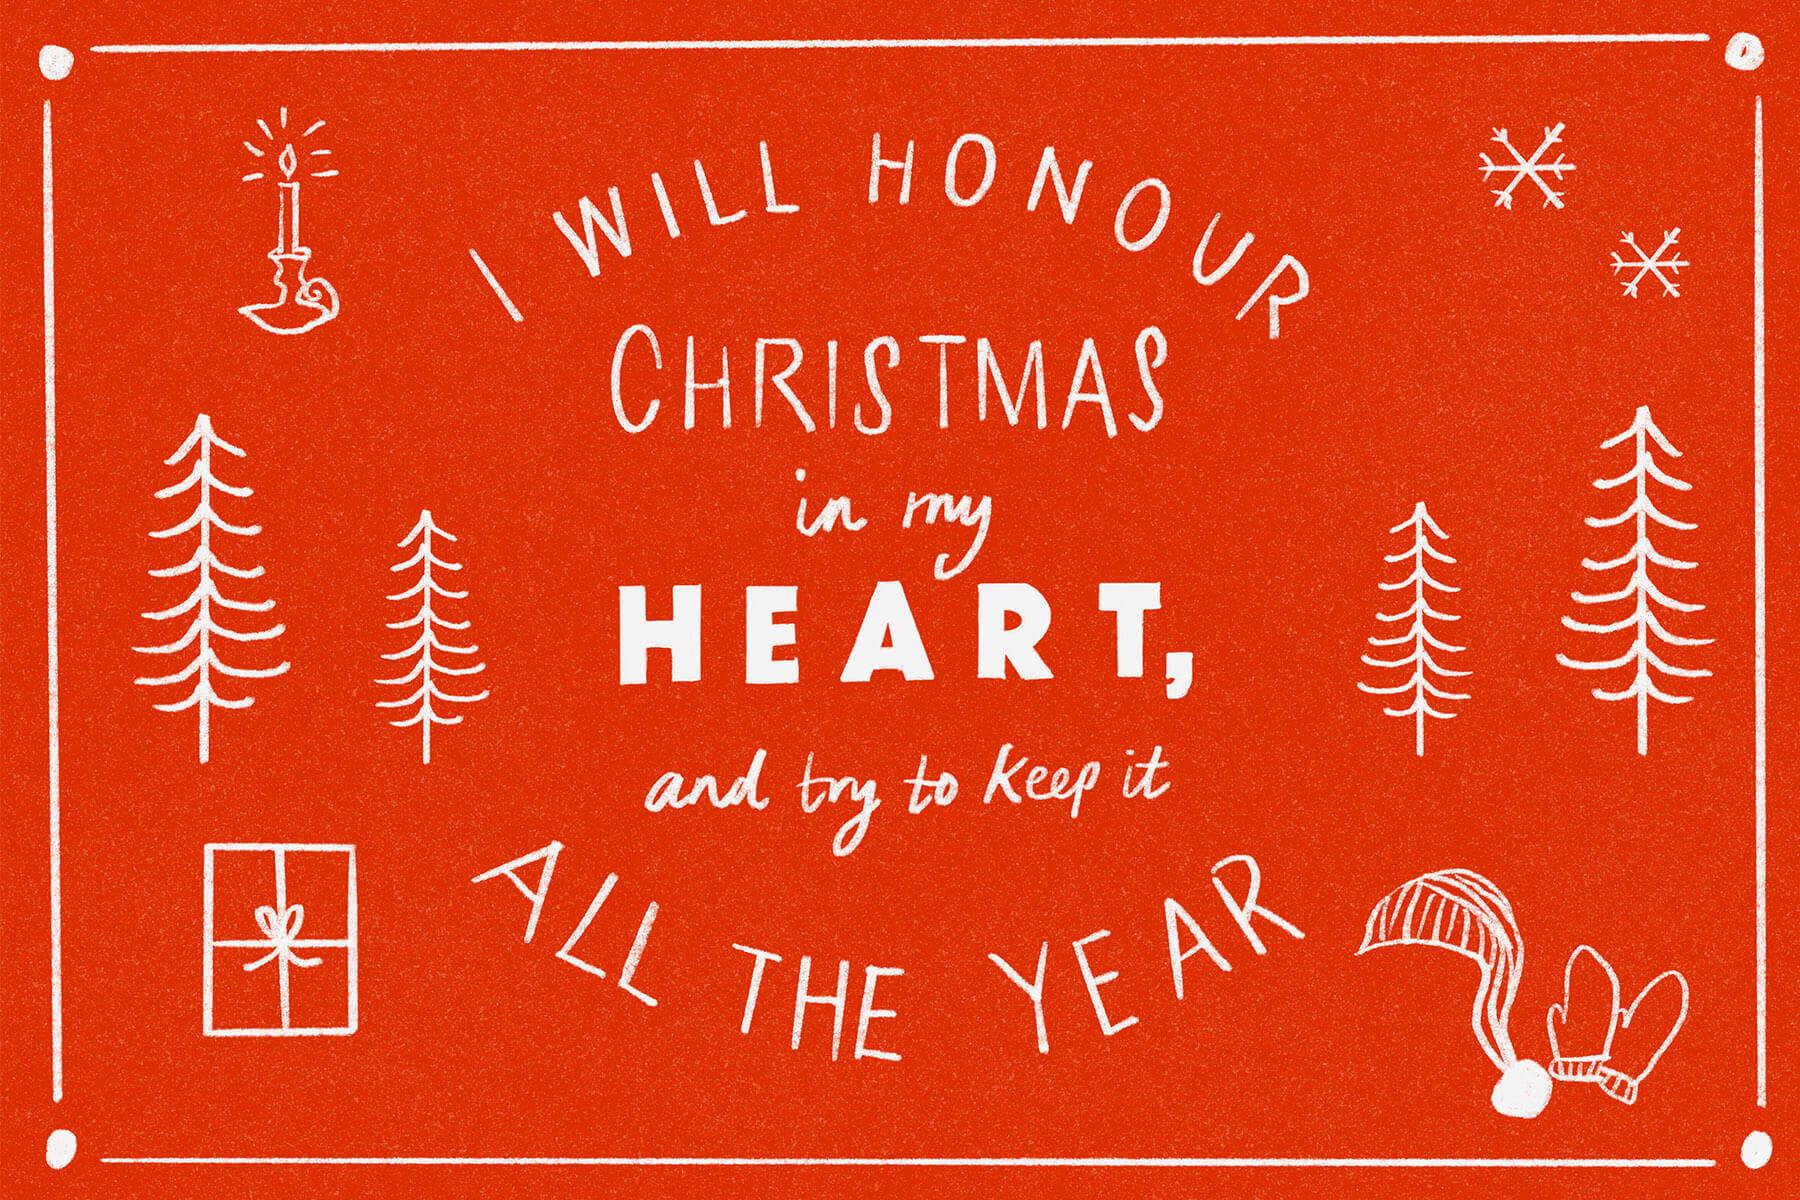 The best literary quotes about Christmas